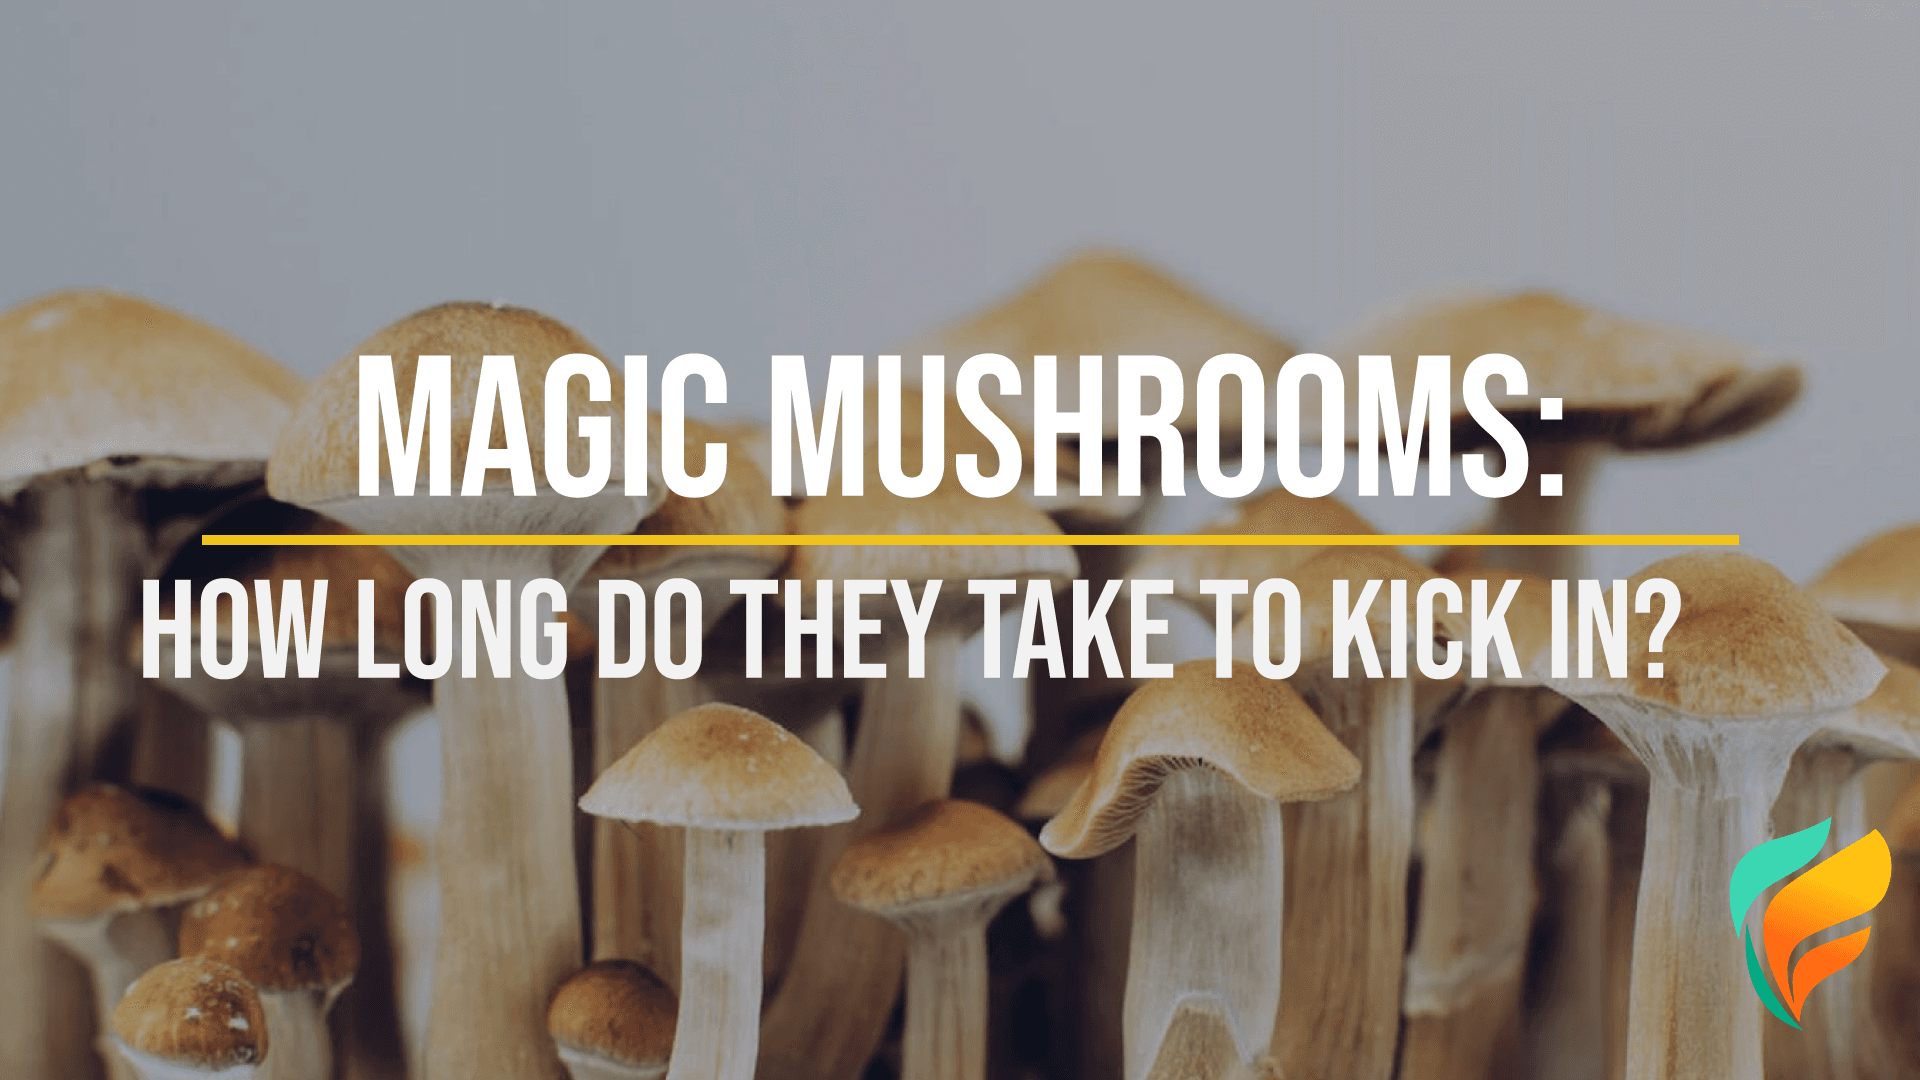 How Long Does It Take Magic Mushrooms To Kick In?